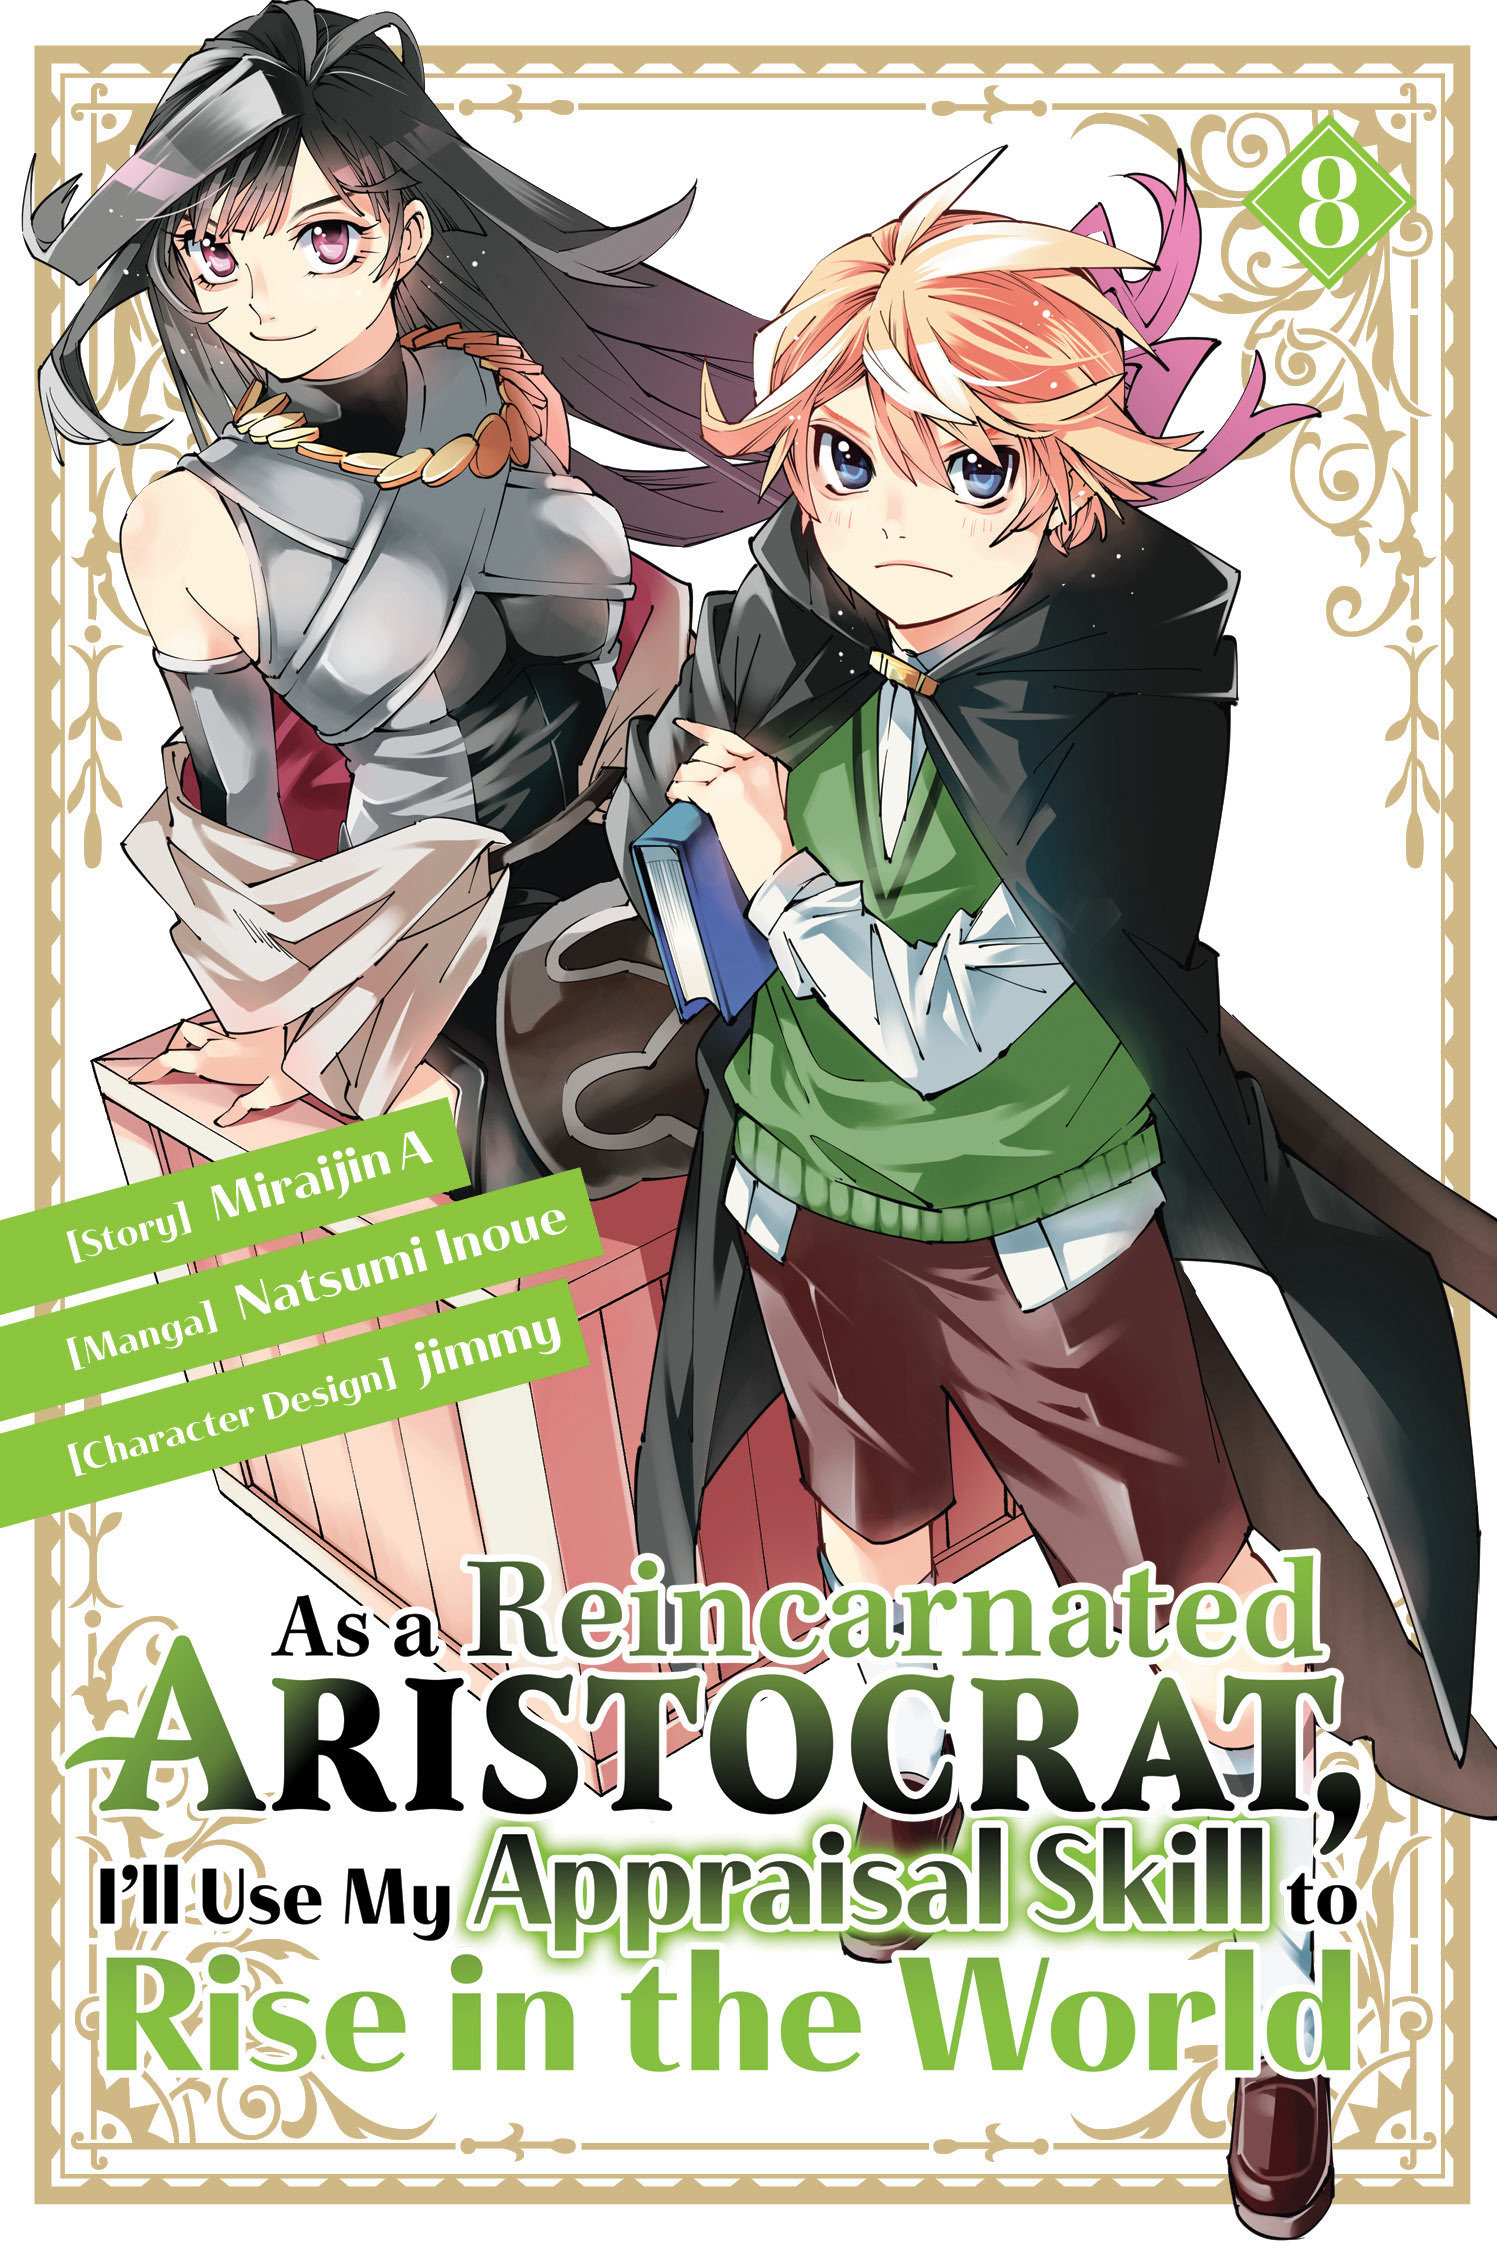 As a Reincarnated Aristocrat, I'll Use My Appraisal Skill to Rise in the World Manga Volume 8